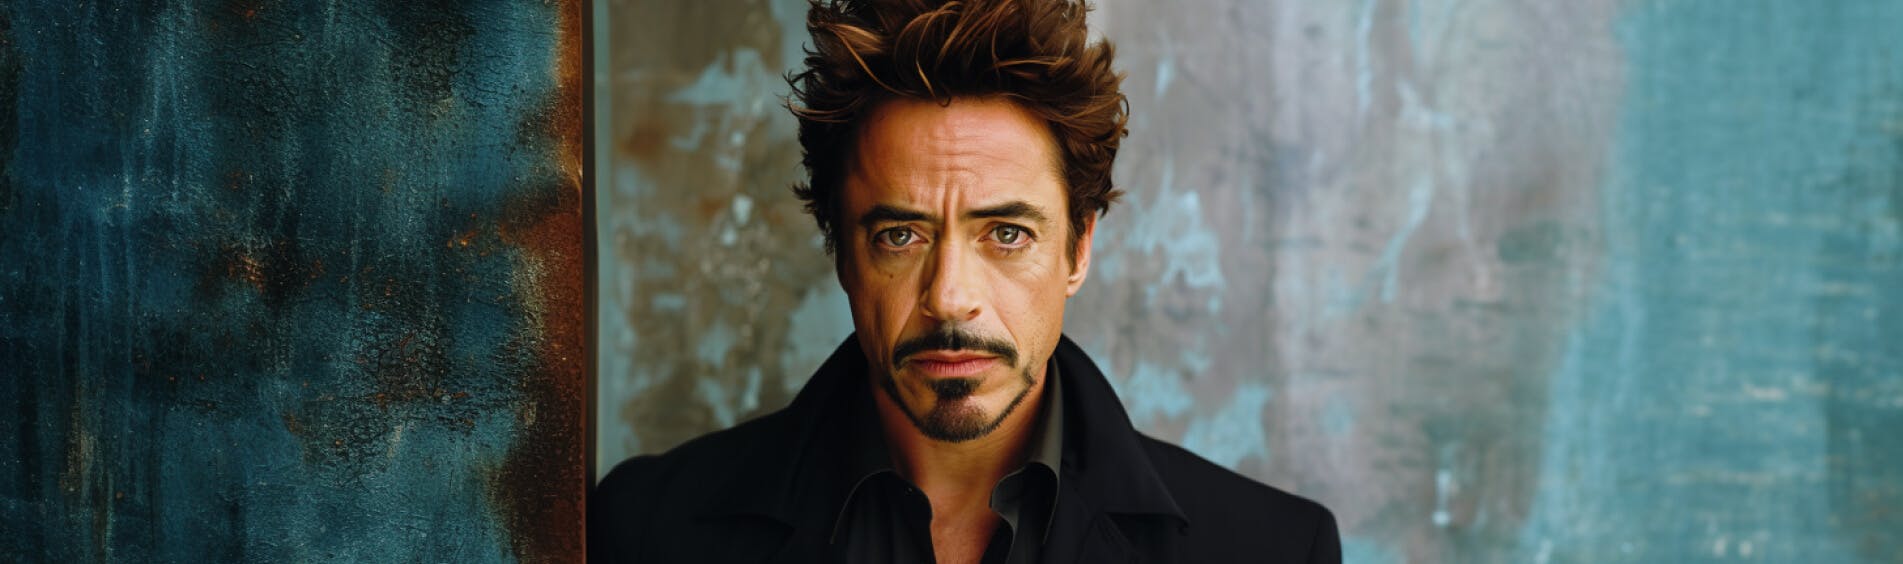 Cover Image for RDJ Looks Dashing At The Premiere Of “The Sympathizer”